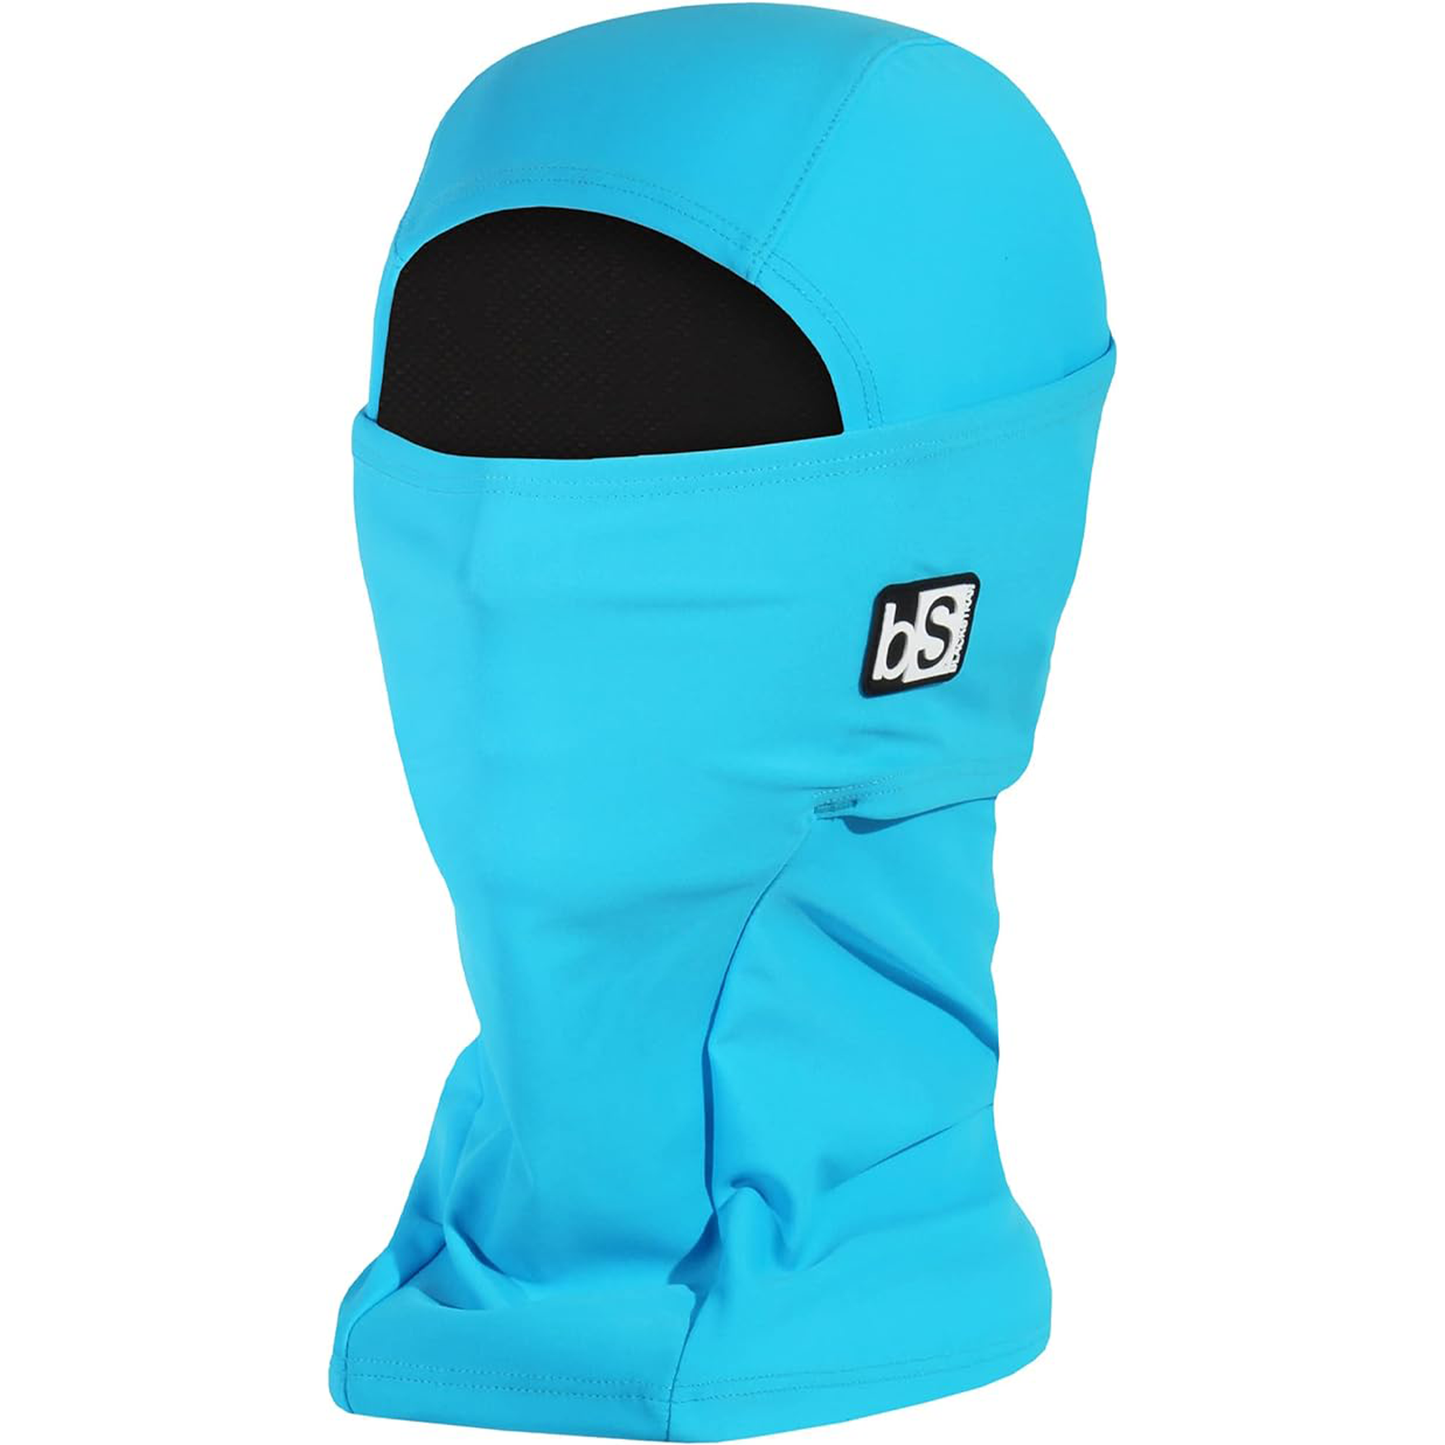 Blackstrap Expedition Hood Bright Blue OS Neck Warmers & Face Masks